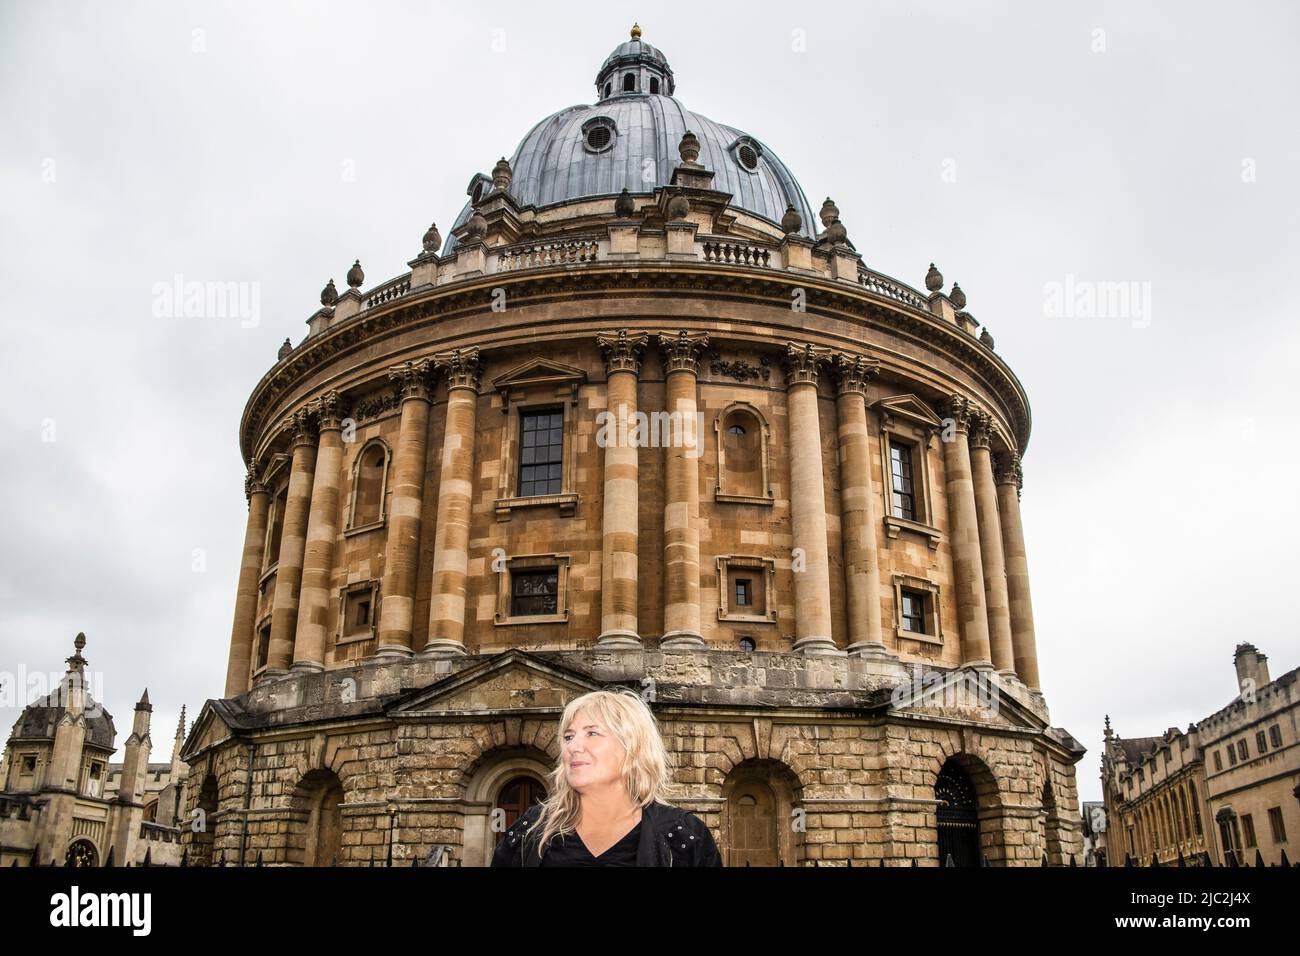 8-27-2019 Oxford USA - Tourist standing in front of the Radcliffe Camera - the round library in Oxford England - on a typical overcast day Stock Photo